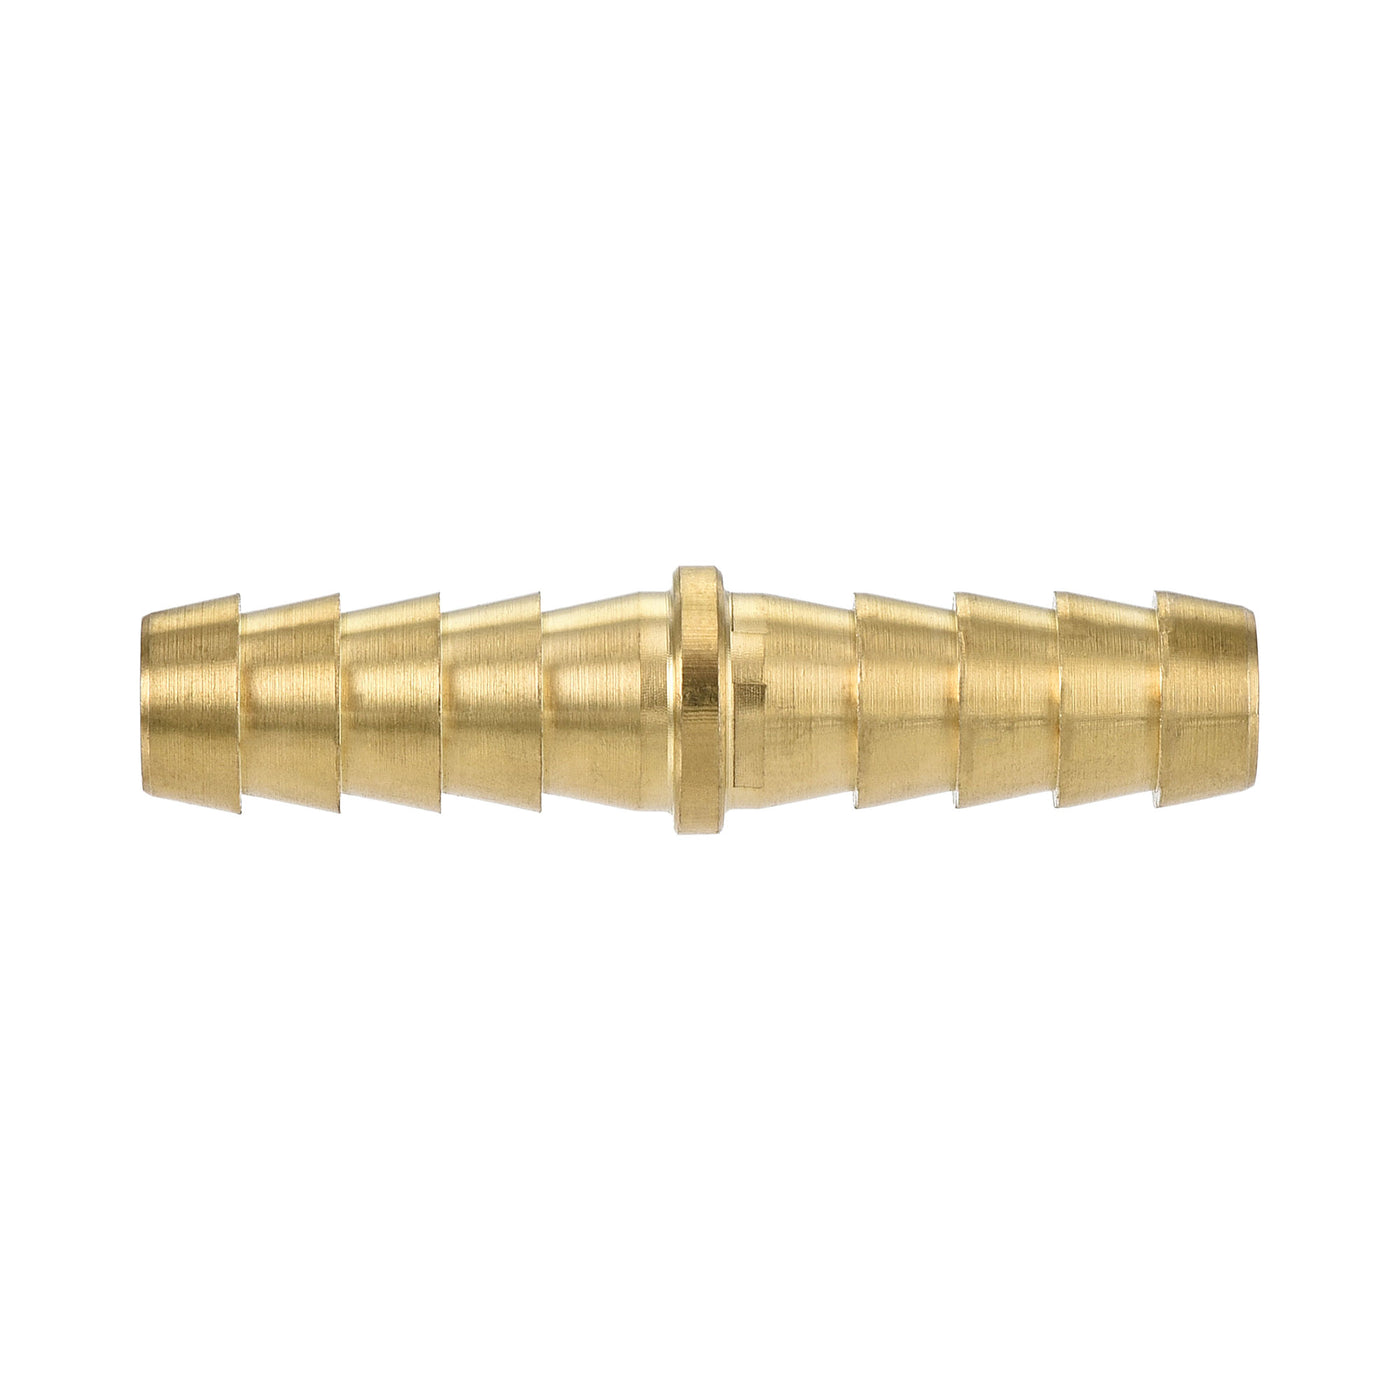 uxcell Uxcell Hose Barb Fitting, 5/16x5/16inch Brass Hollow Straight Quick Connector for Water Fuel Air Oil Gas